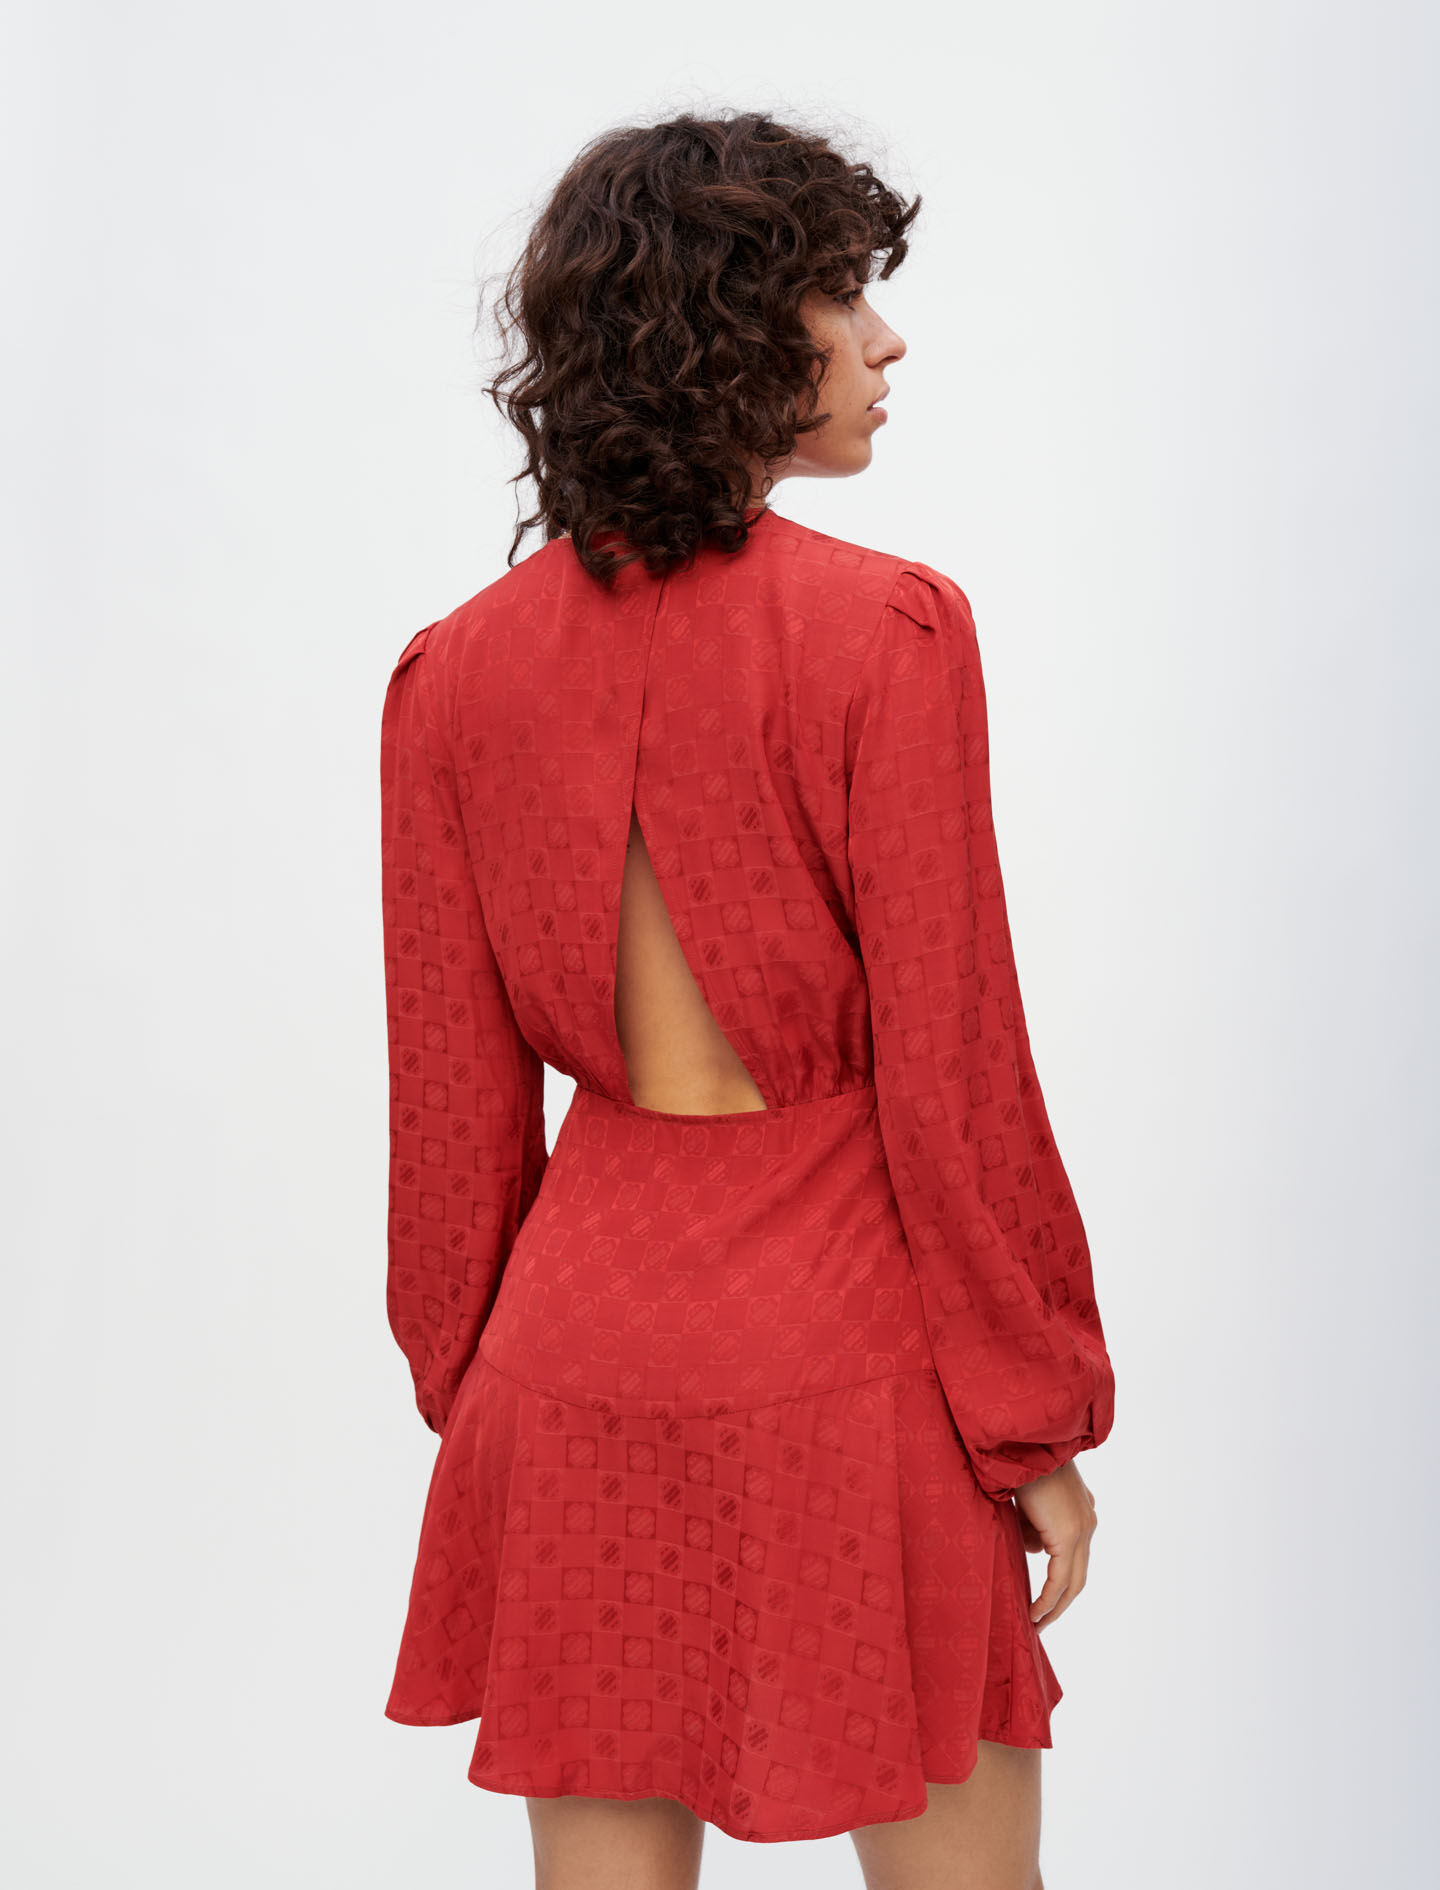 Women's Red Dresses - The Latest Styles | Maje